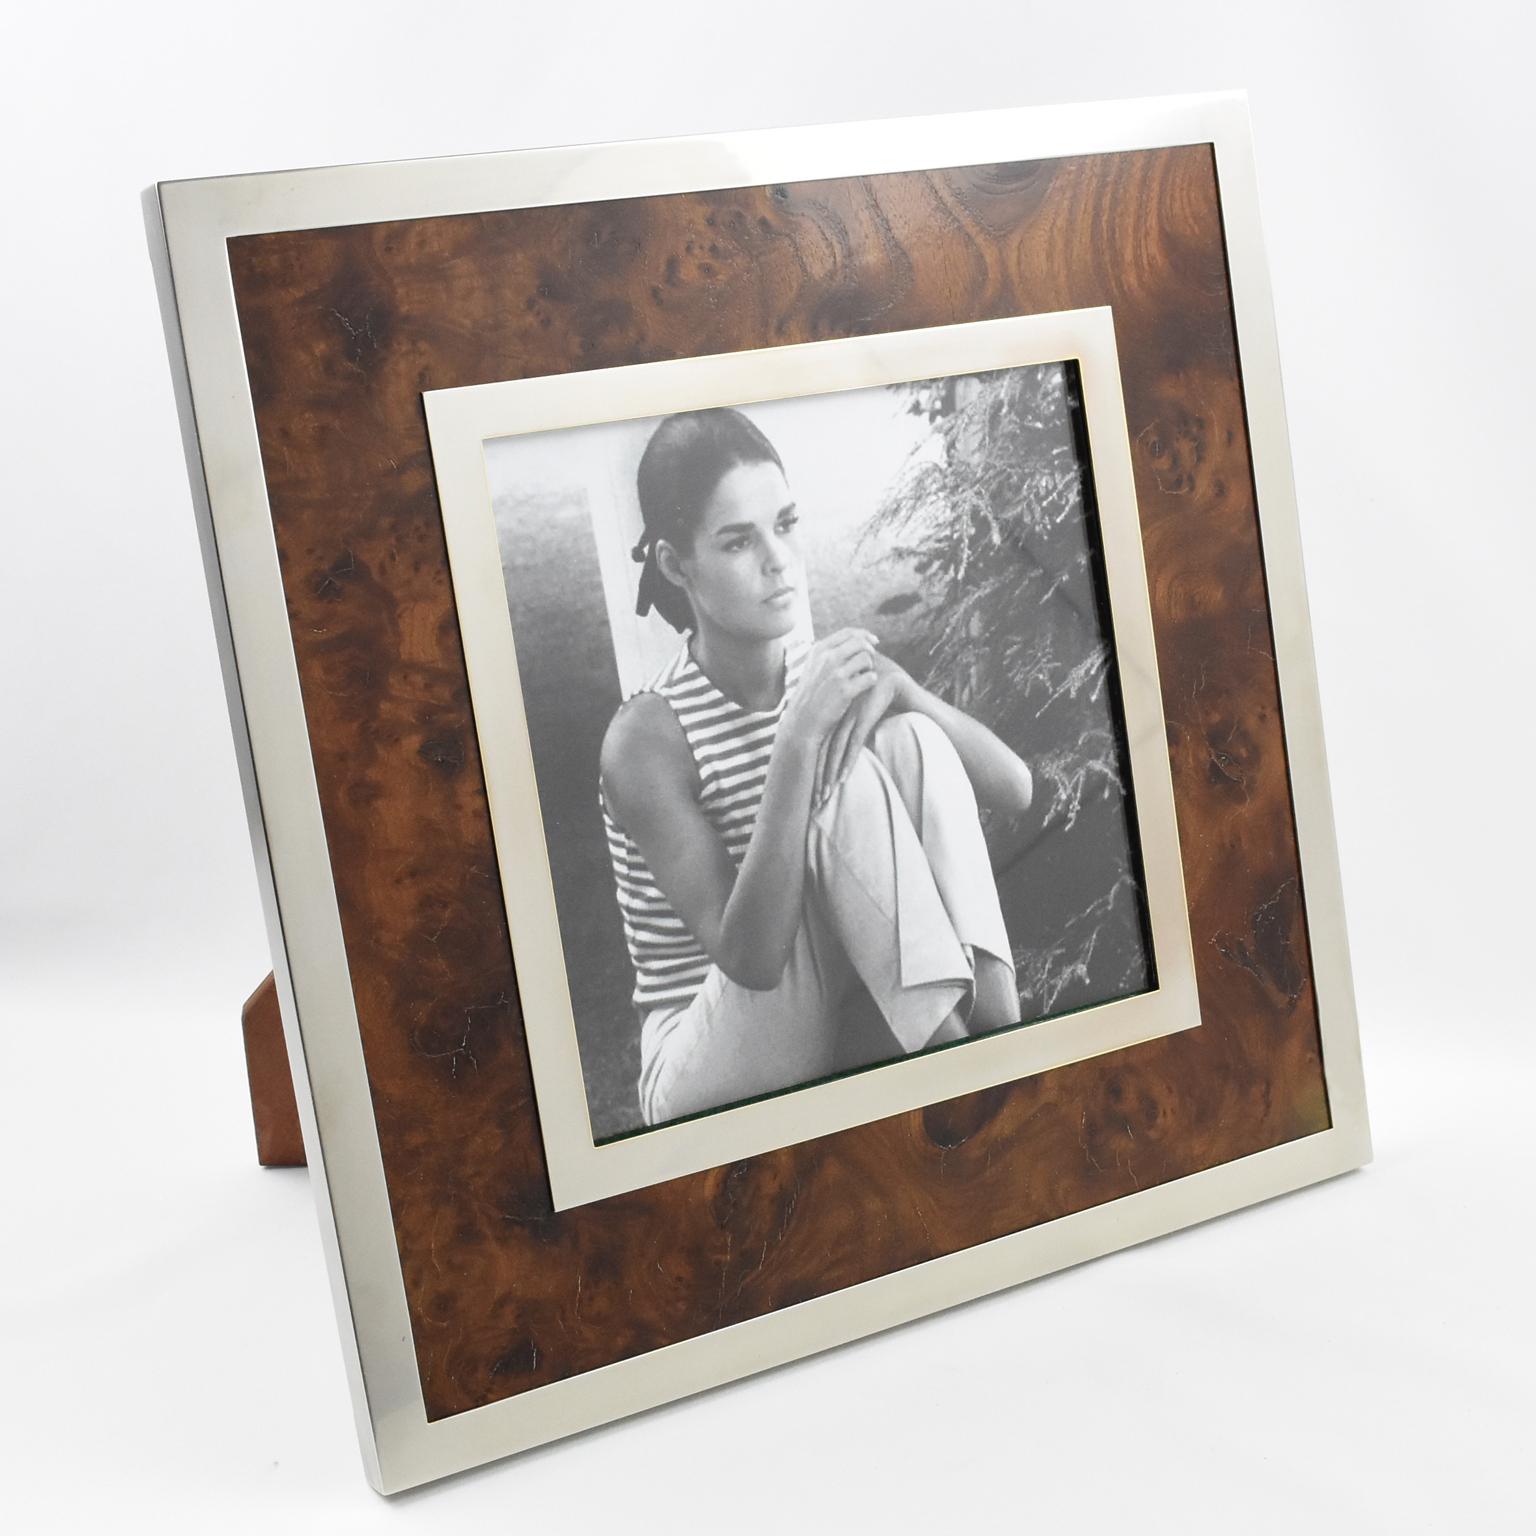 Superb large square picture photo frame, manufactured for Italian designer Richard Ginori. Chromed metal and burled olive-wood modernist design. Back and easel in polished mahogany. Marked on easel: 'Prodotto per Richard